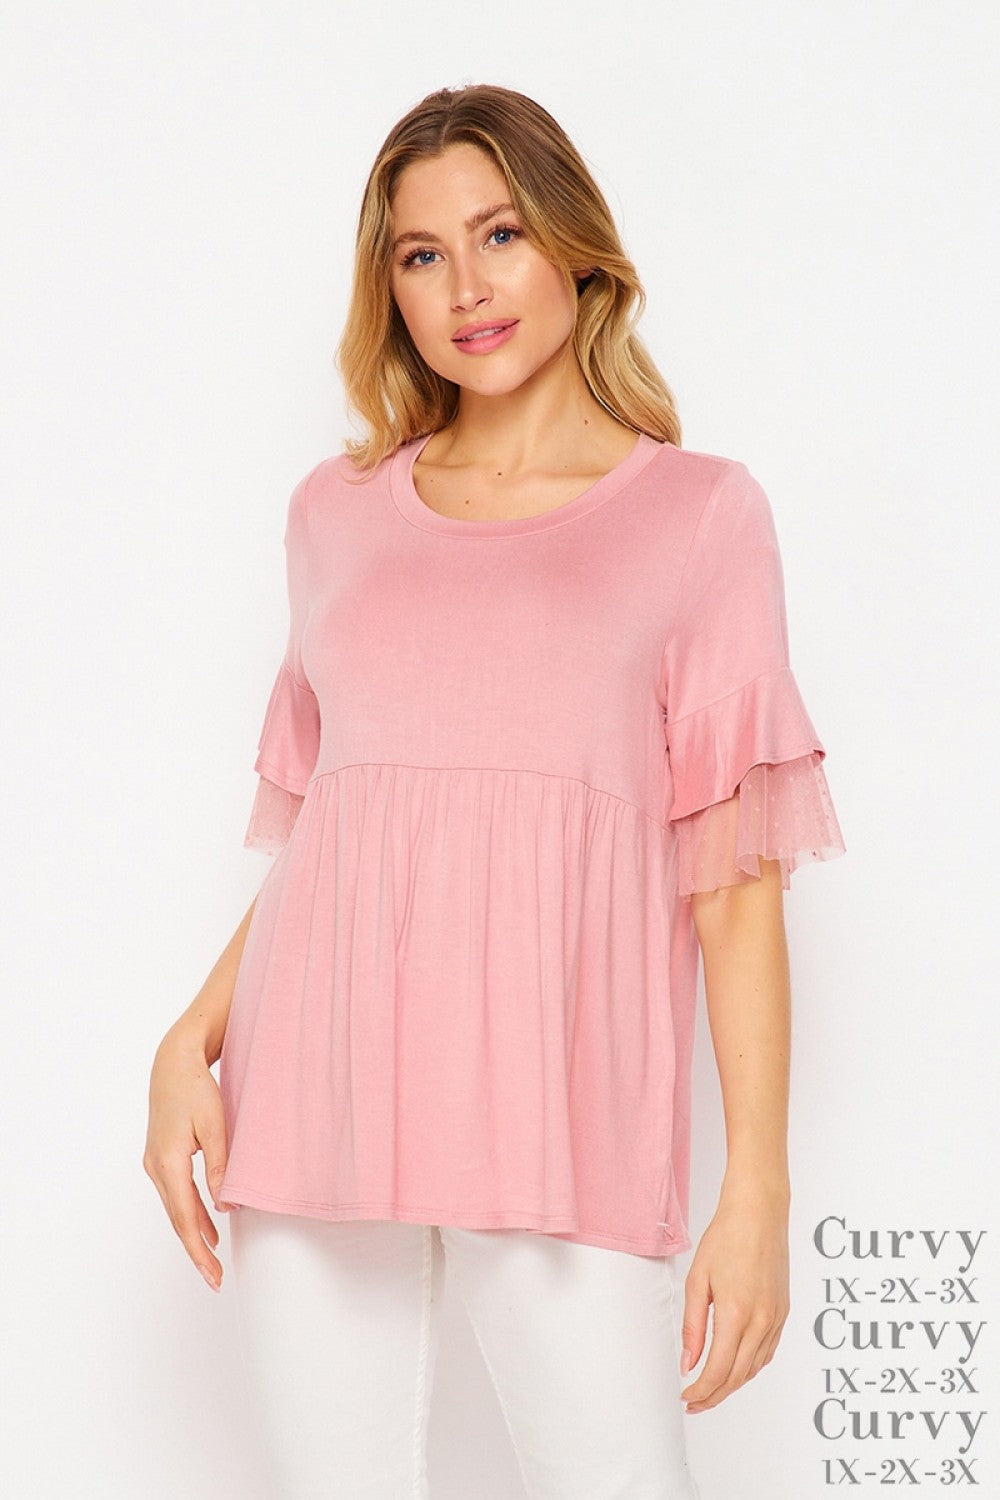 Baby Doll Top with Sheer Ruffle Sleeves - Mauve